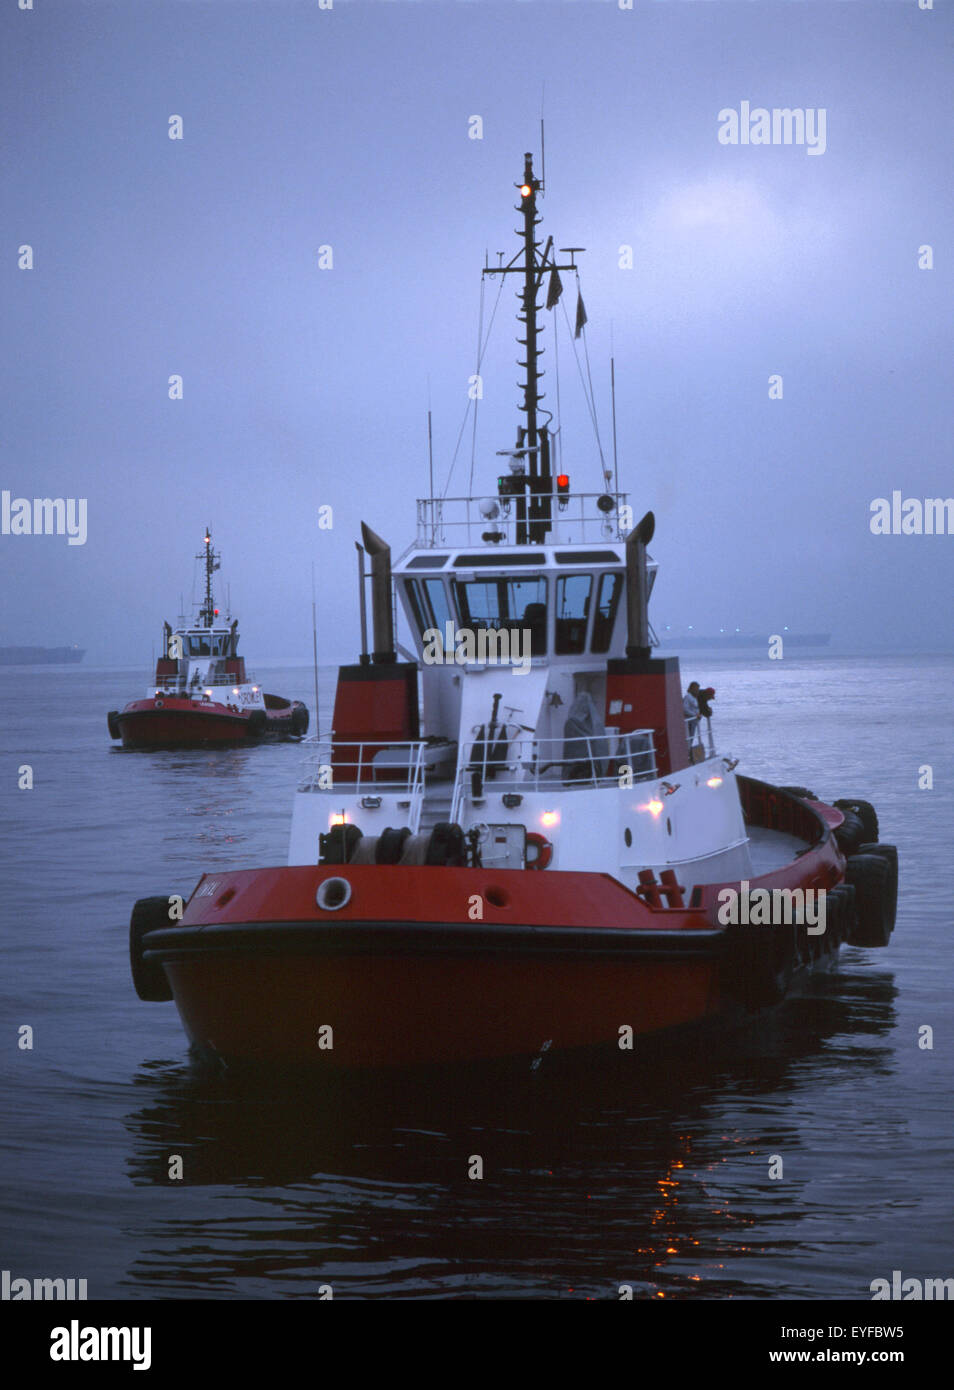 tugboats waiting for ship in pre-dawn light Stock Photo